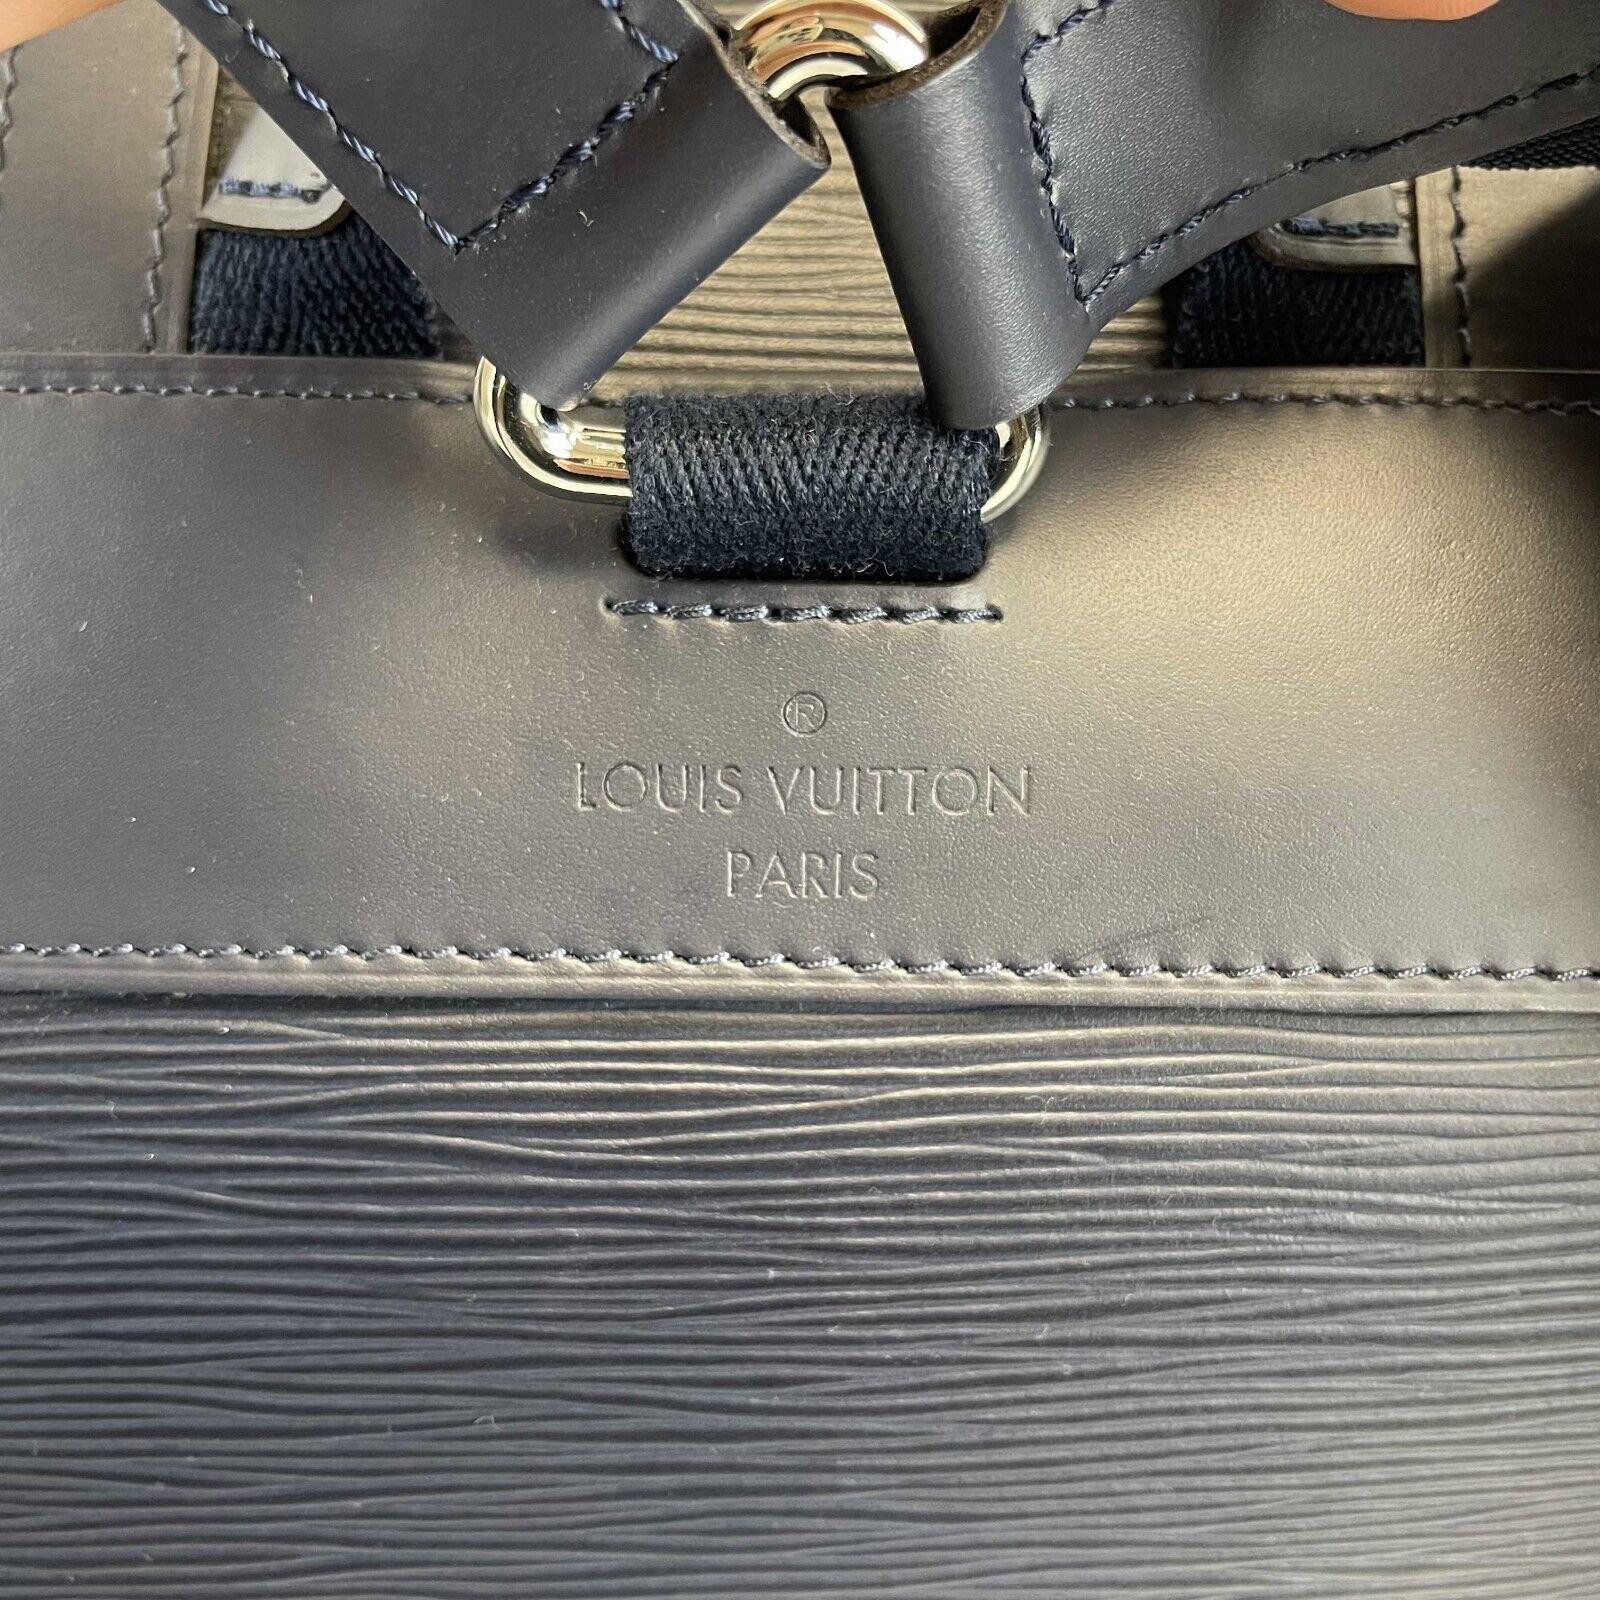 Louis Vuitton - LV - NEW Christopher MM Medium Navy Blue Backpack
Measurements

Width: 13 in / 33.02 cm
Height: 17.5 in / 44.45 cm
Depth: 5 in / 12.7 cm
Handle Drop: 2.5 in / 6.35 cm
Details

Made In: France
Color: Navy Blue
Accessories: Dust